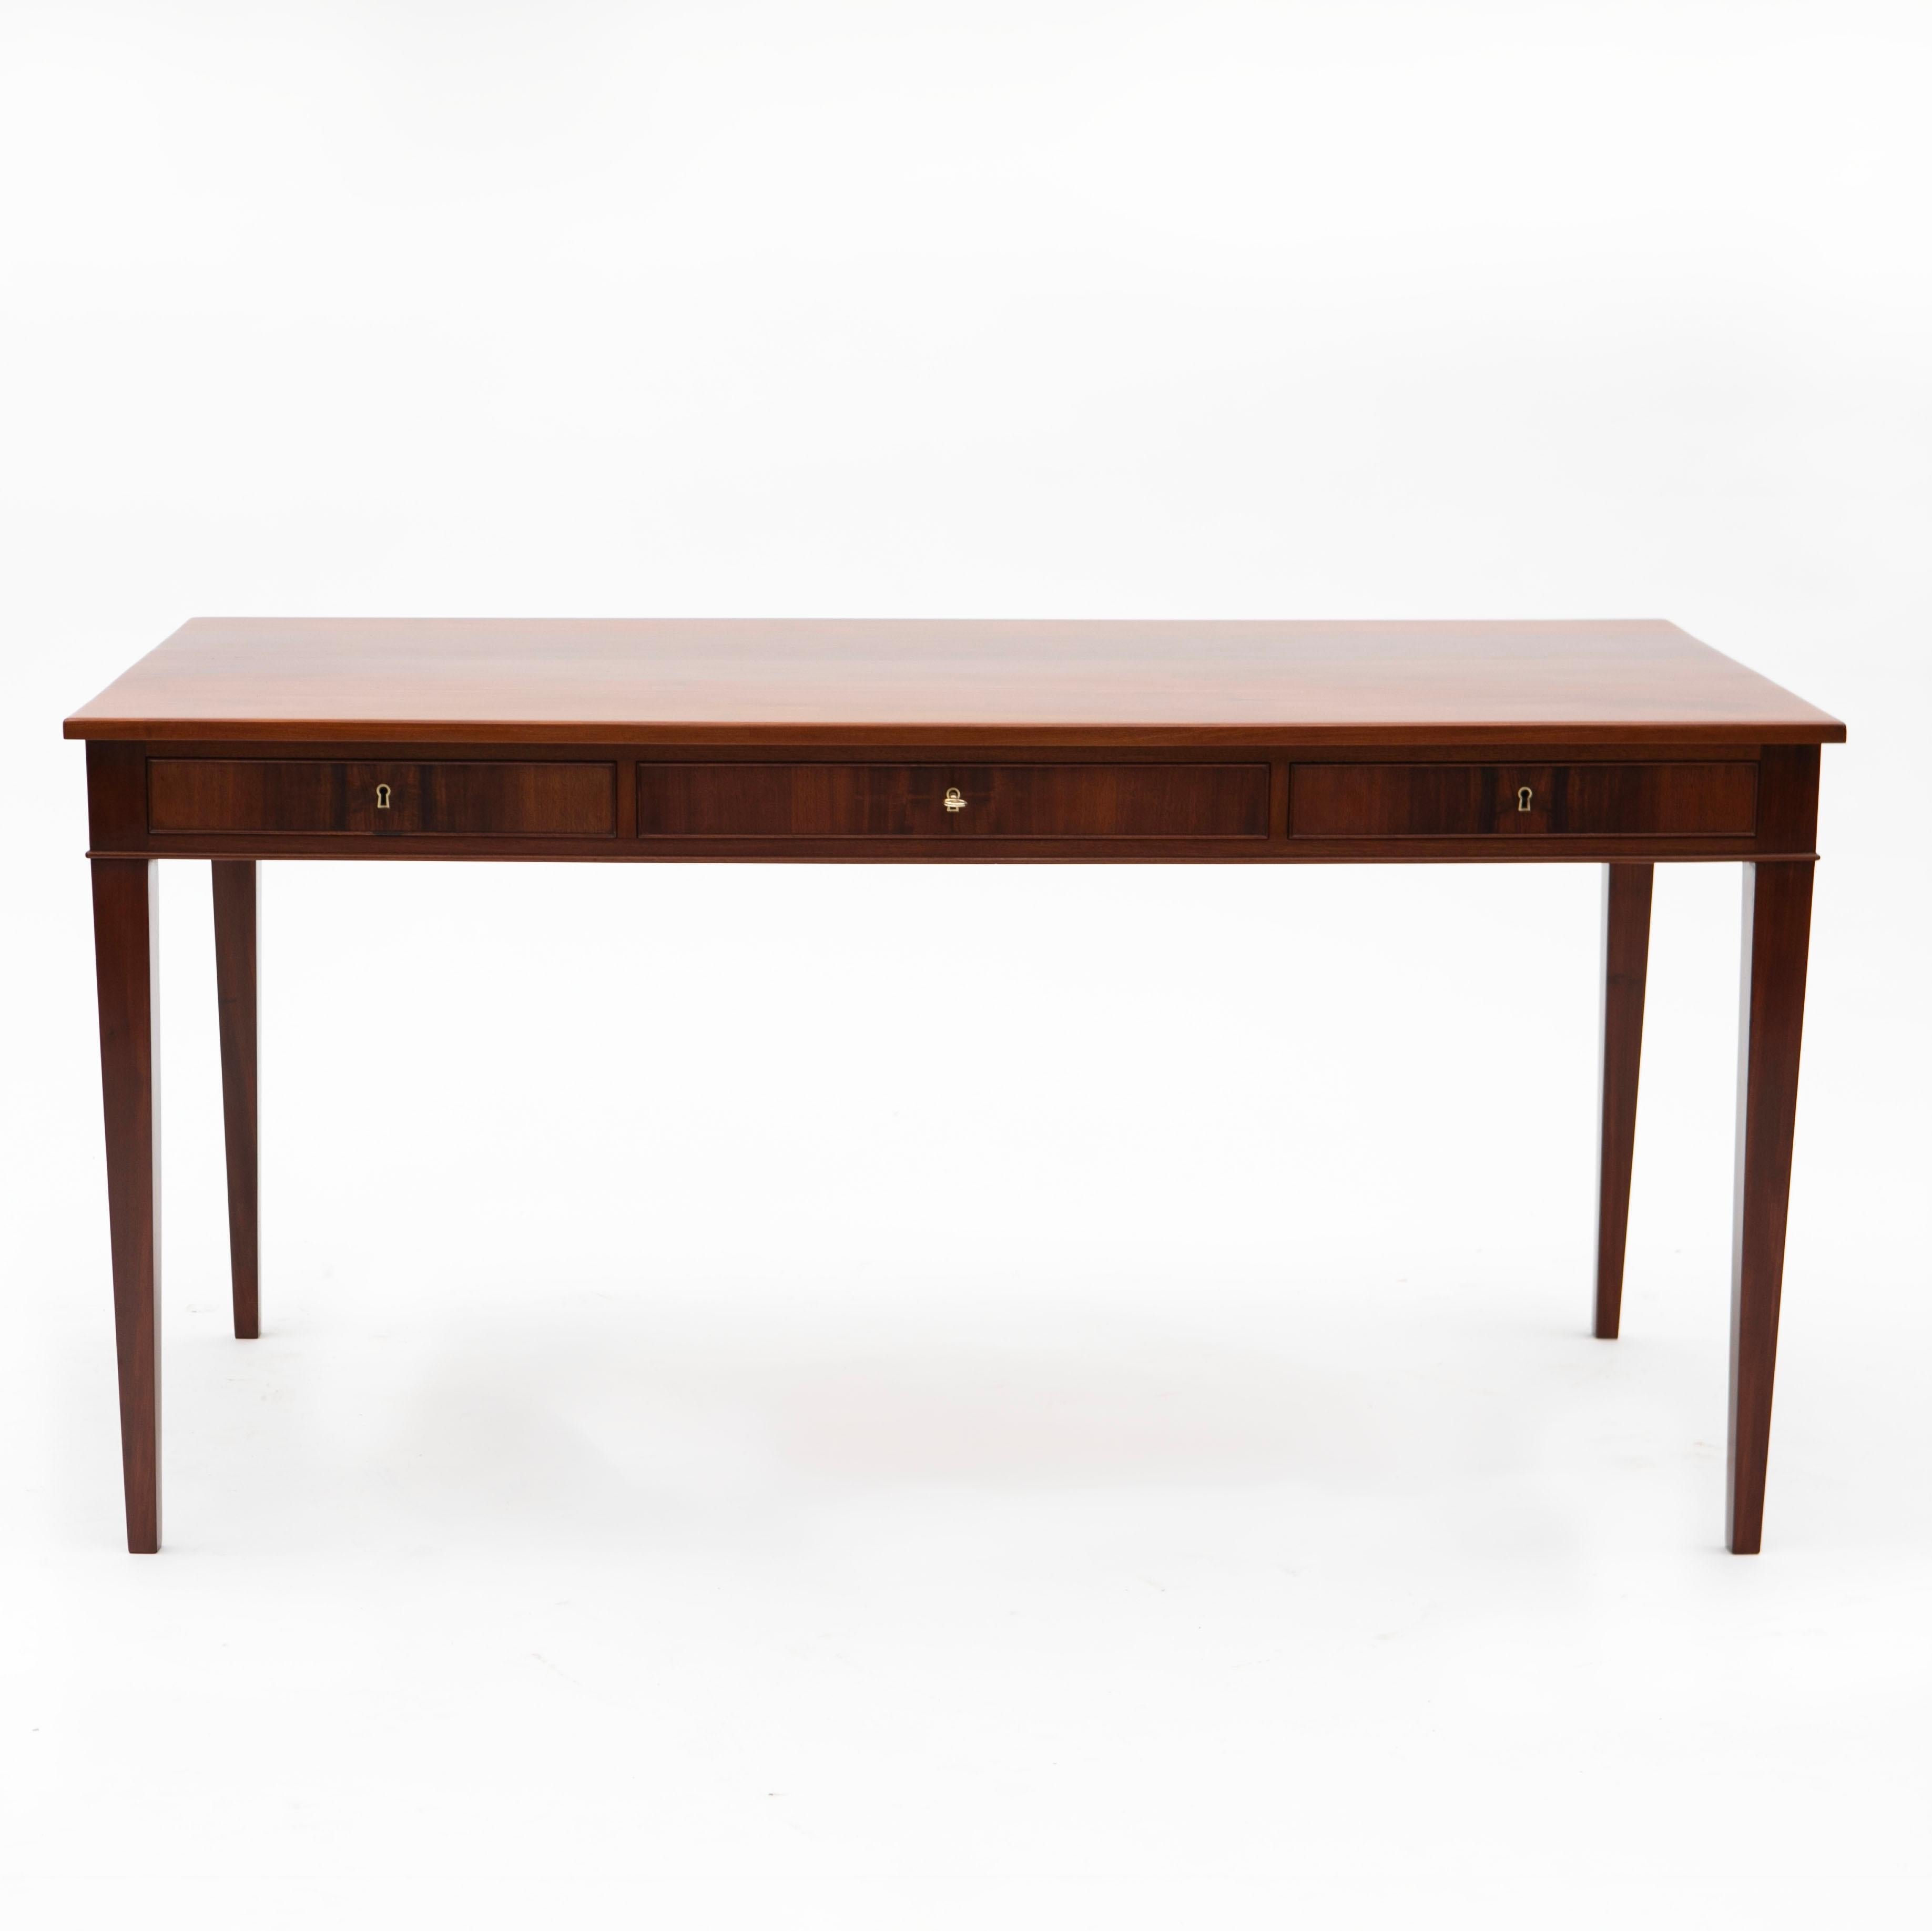 Frits Henningsen, Danish furniture designer and cabinet maker (1889-1965).
Solid Cuba mahogany writing table and chair.  The writing desk displays a rectangular top with molded edge above three cock beaded drawers with a molded edge. Raised on